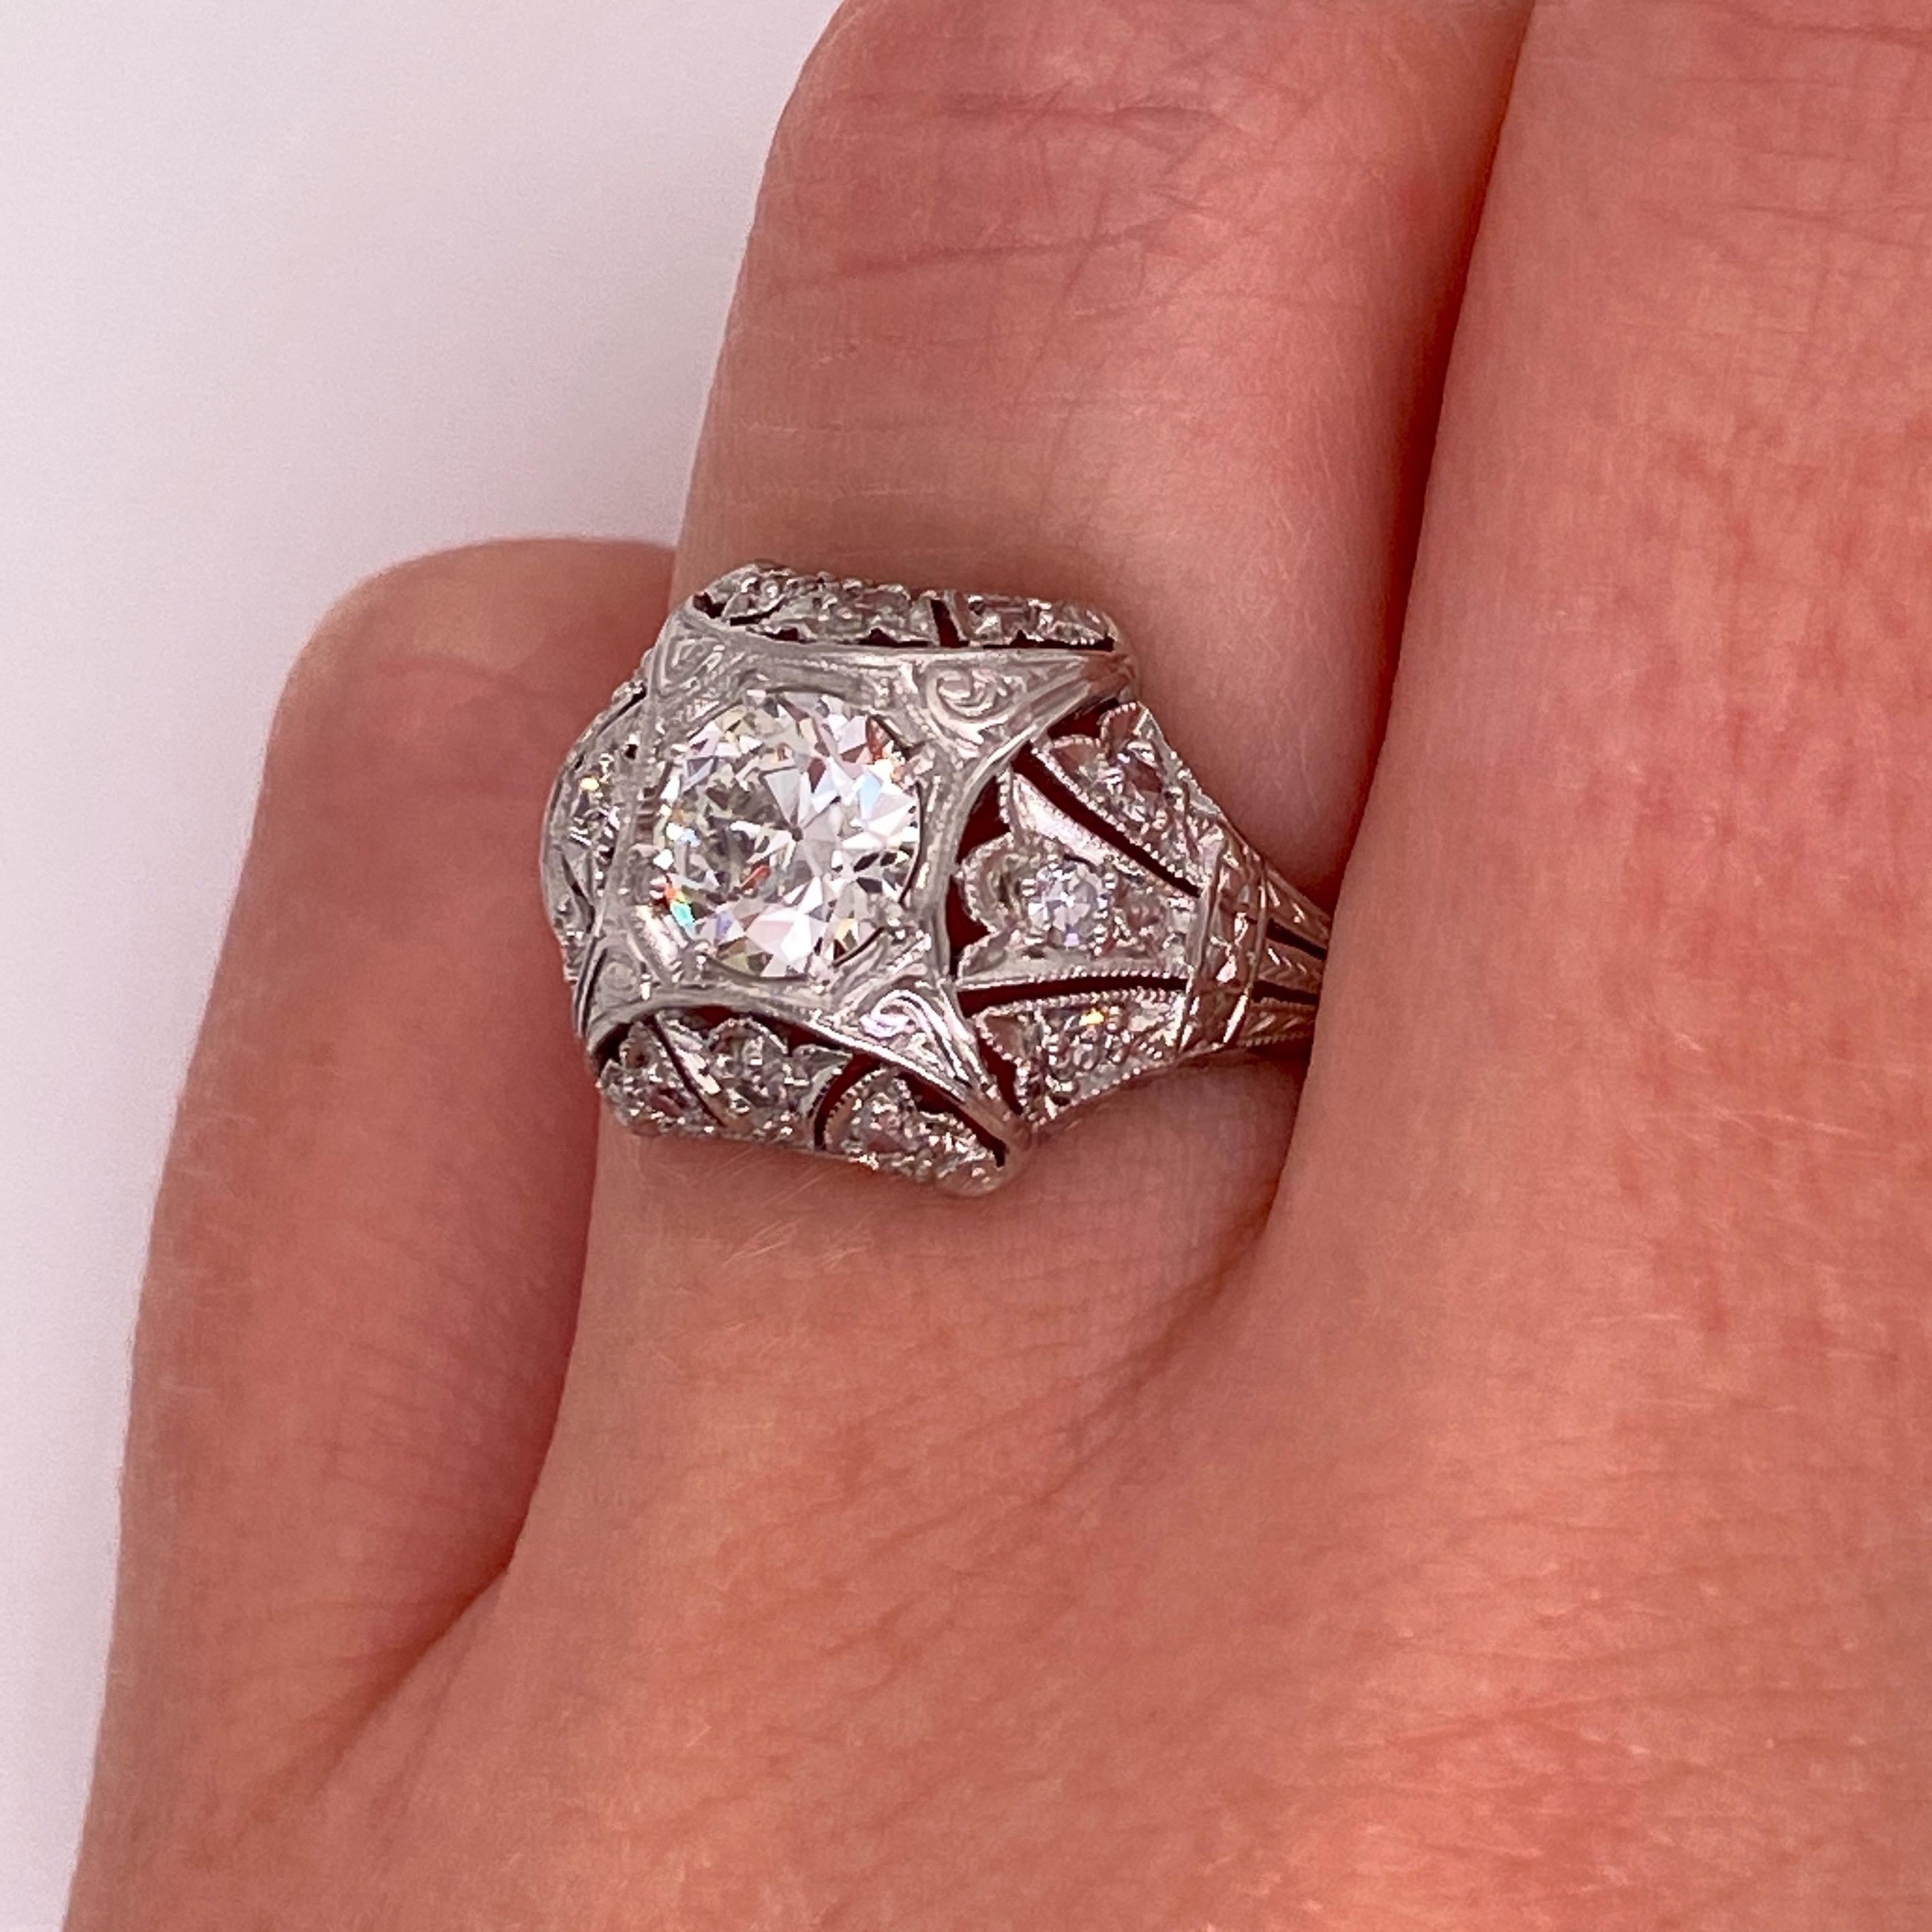 Antique 1920s Platinum Diamond Engagement Ring .74 Carat In Good Condition For Sale In Boston, MA